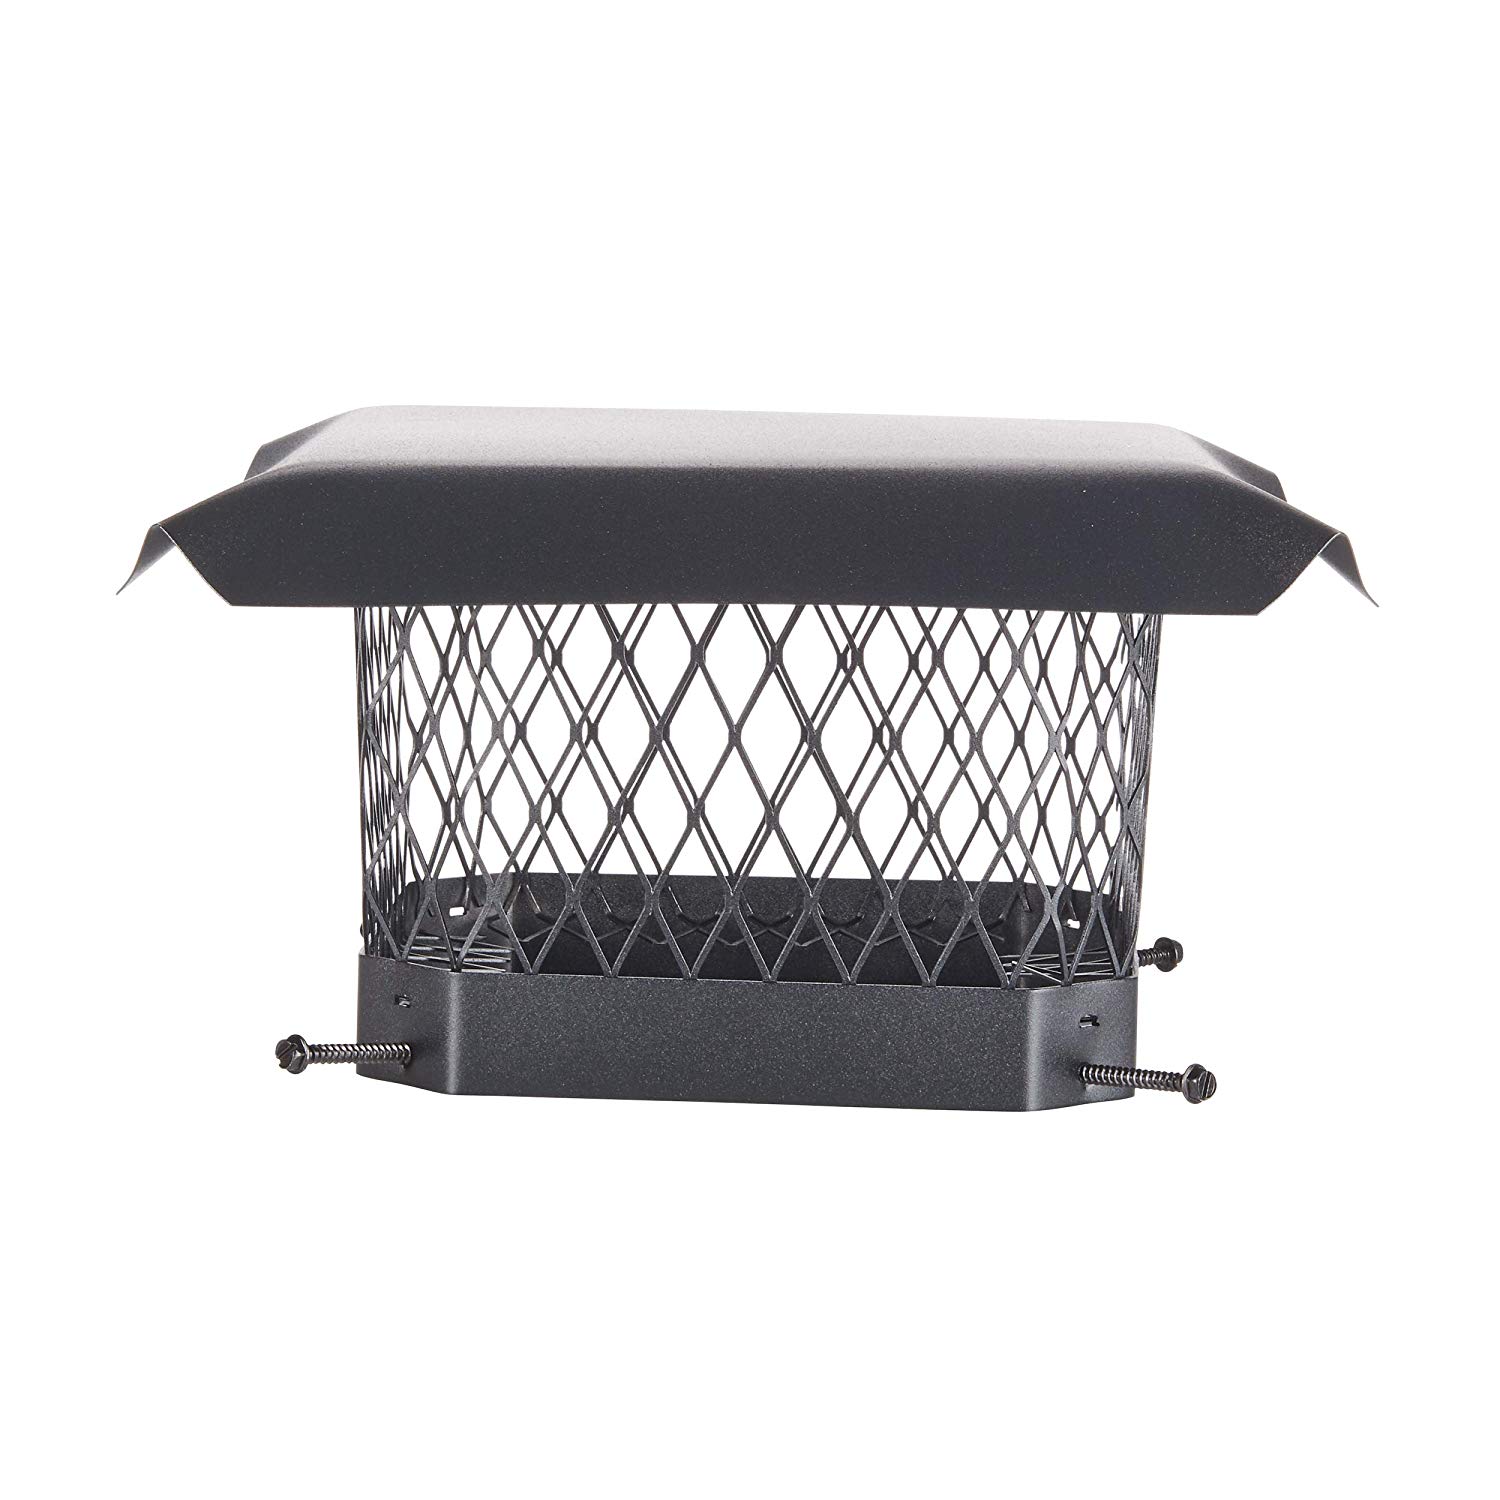 Review of HY-C SC99 Shelter Bolt On Single Flue Chimney Cover, Mesh Size 3/4